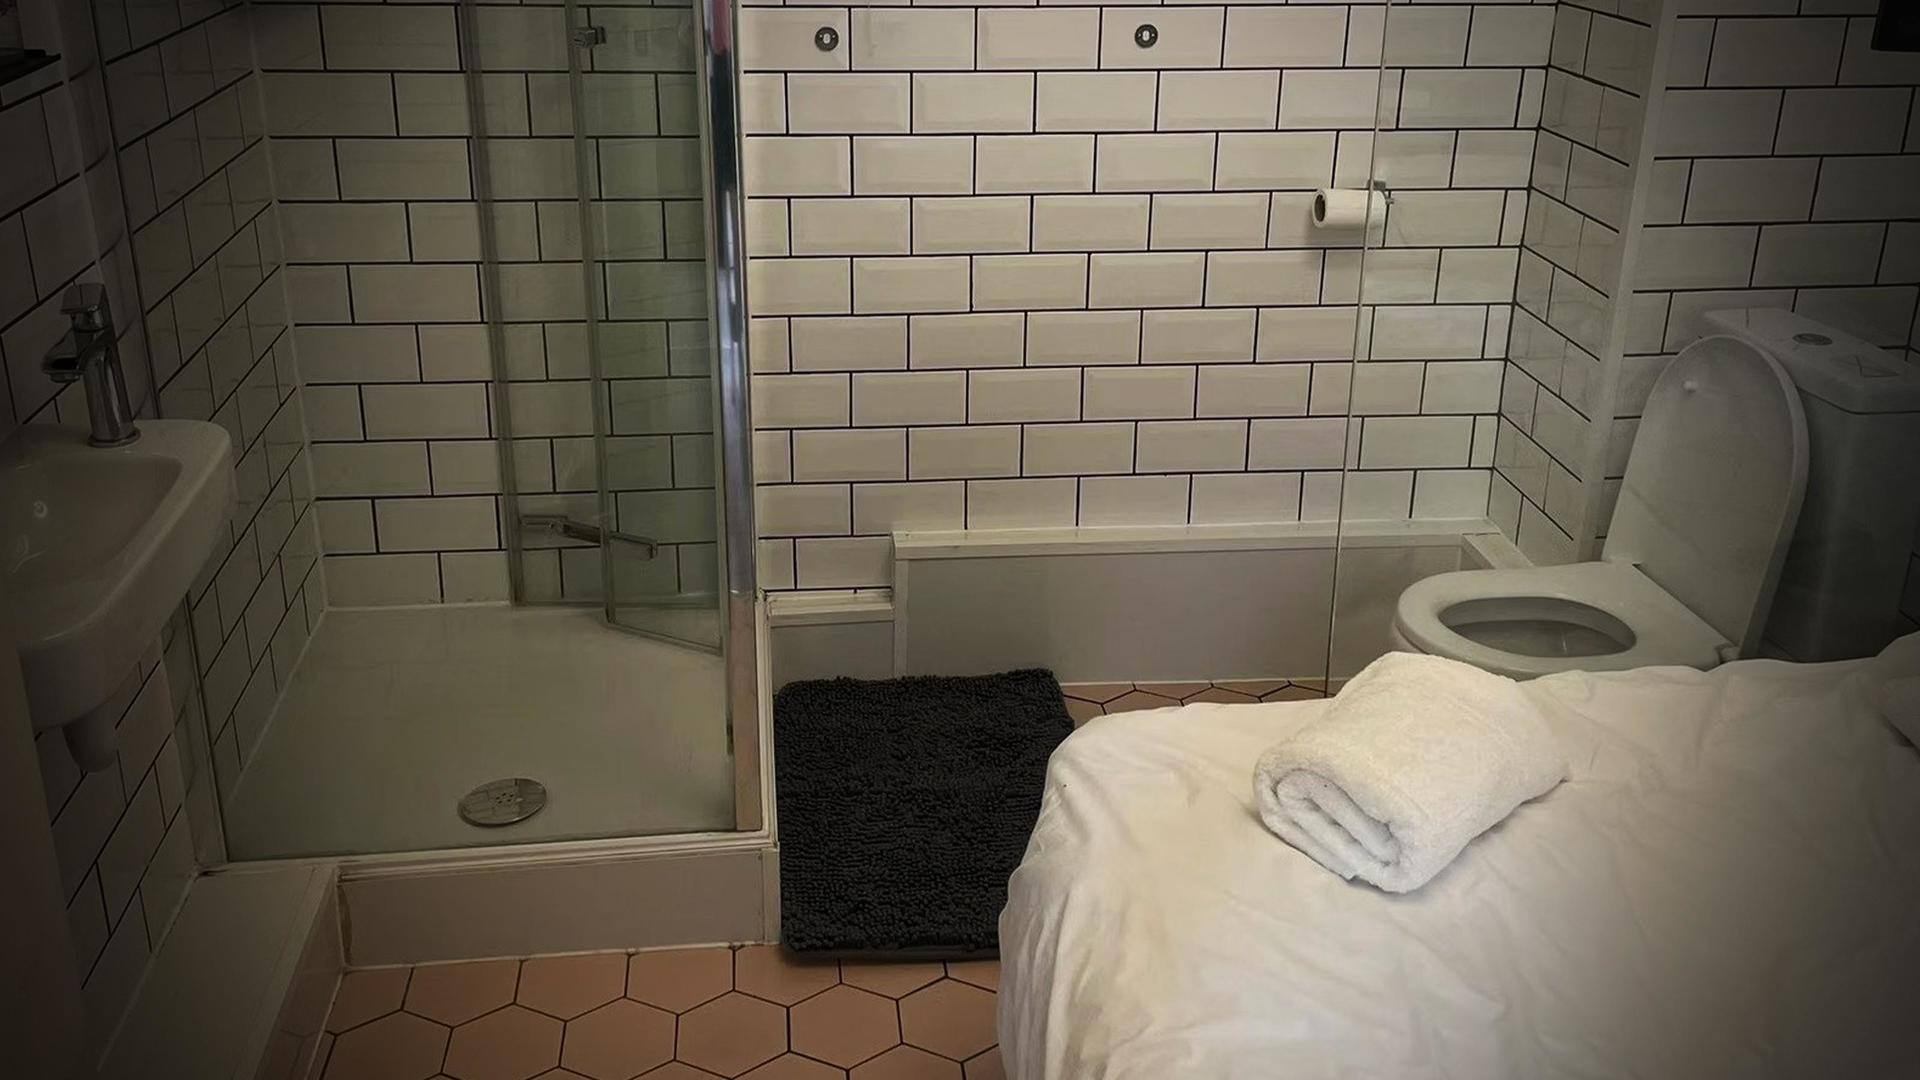 This London Airbnb is a bathroom with a bed!